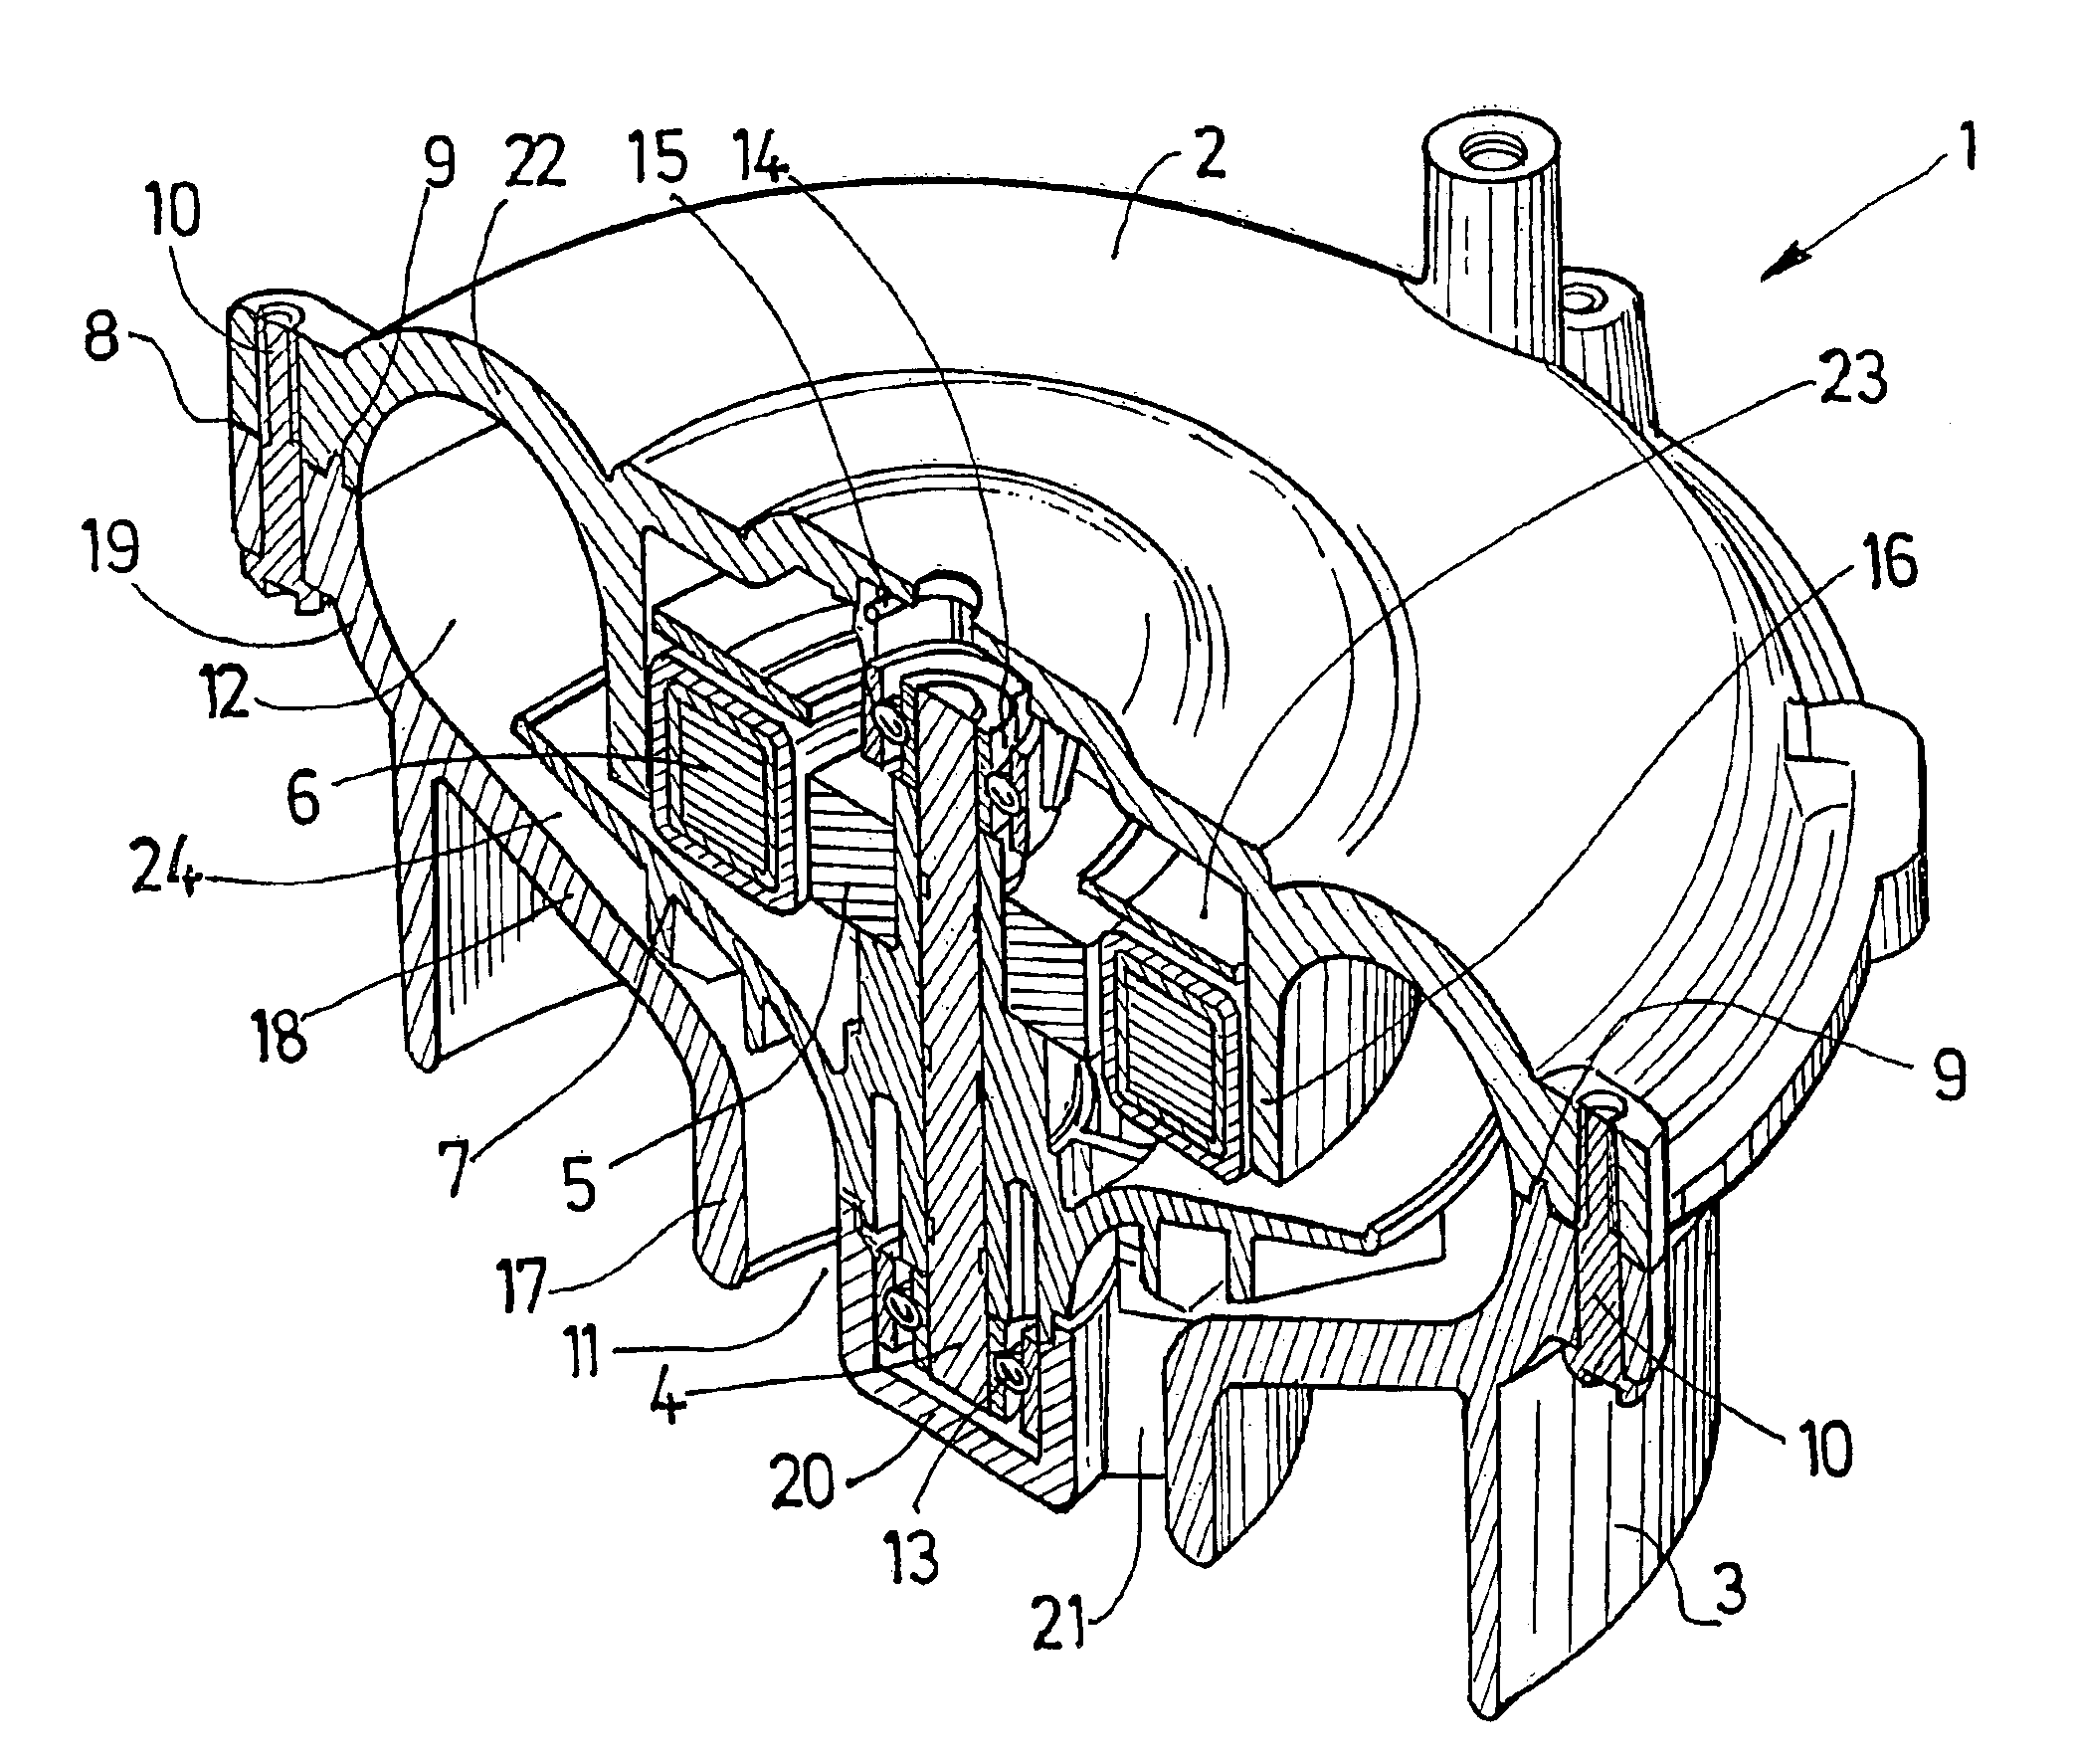 Centrifugal turbine for breathing-aid devices